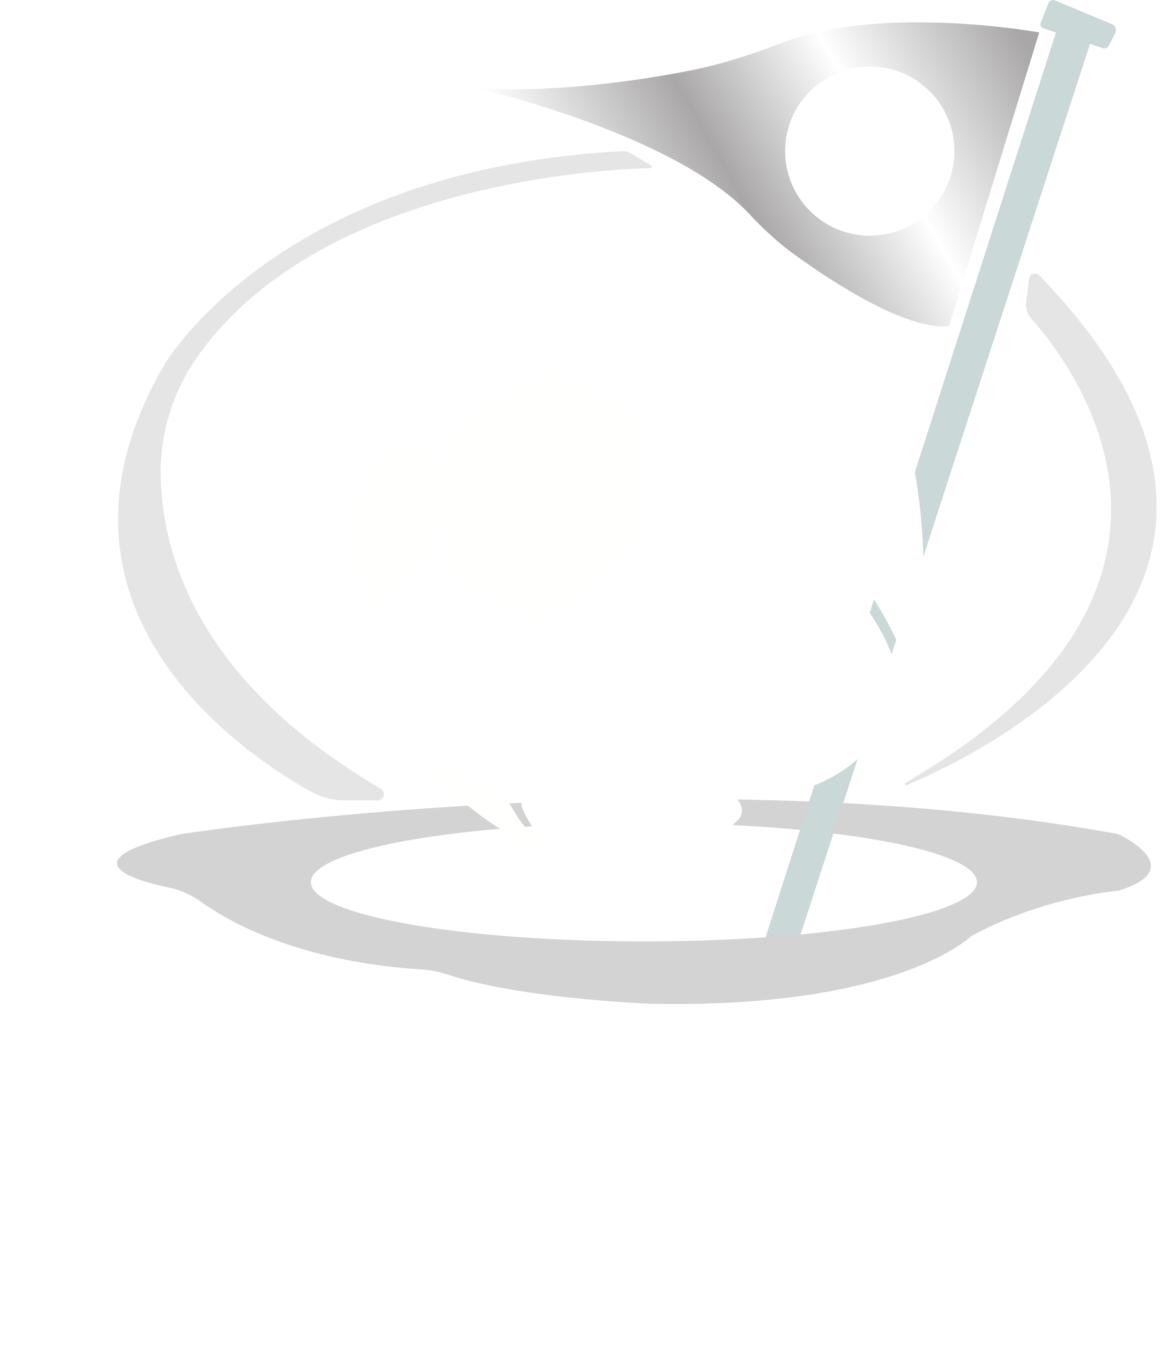 MikeFootgolf-logo-2.png